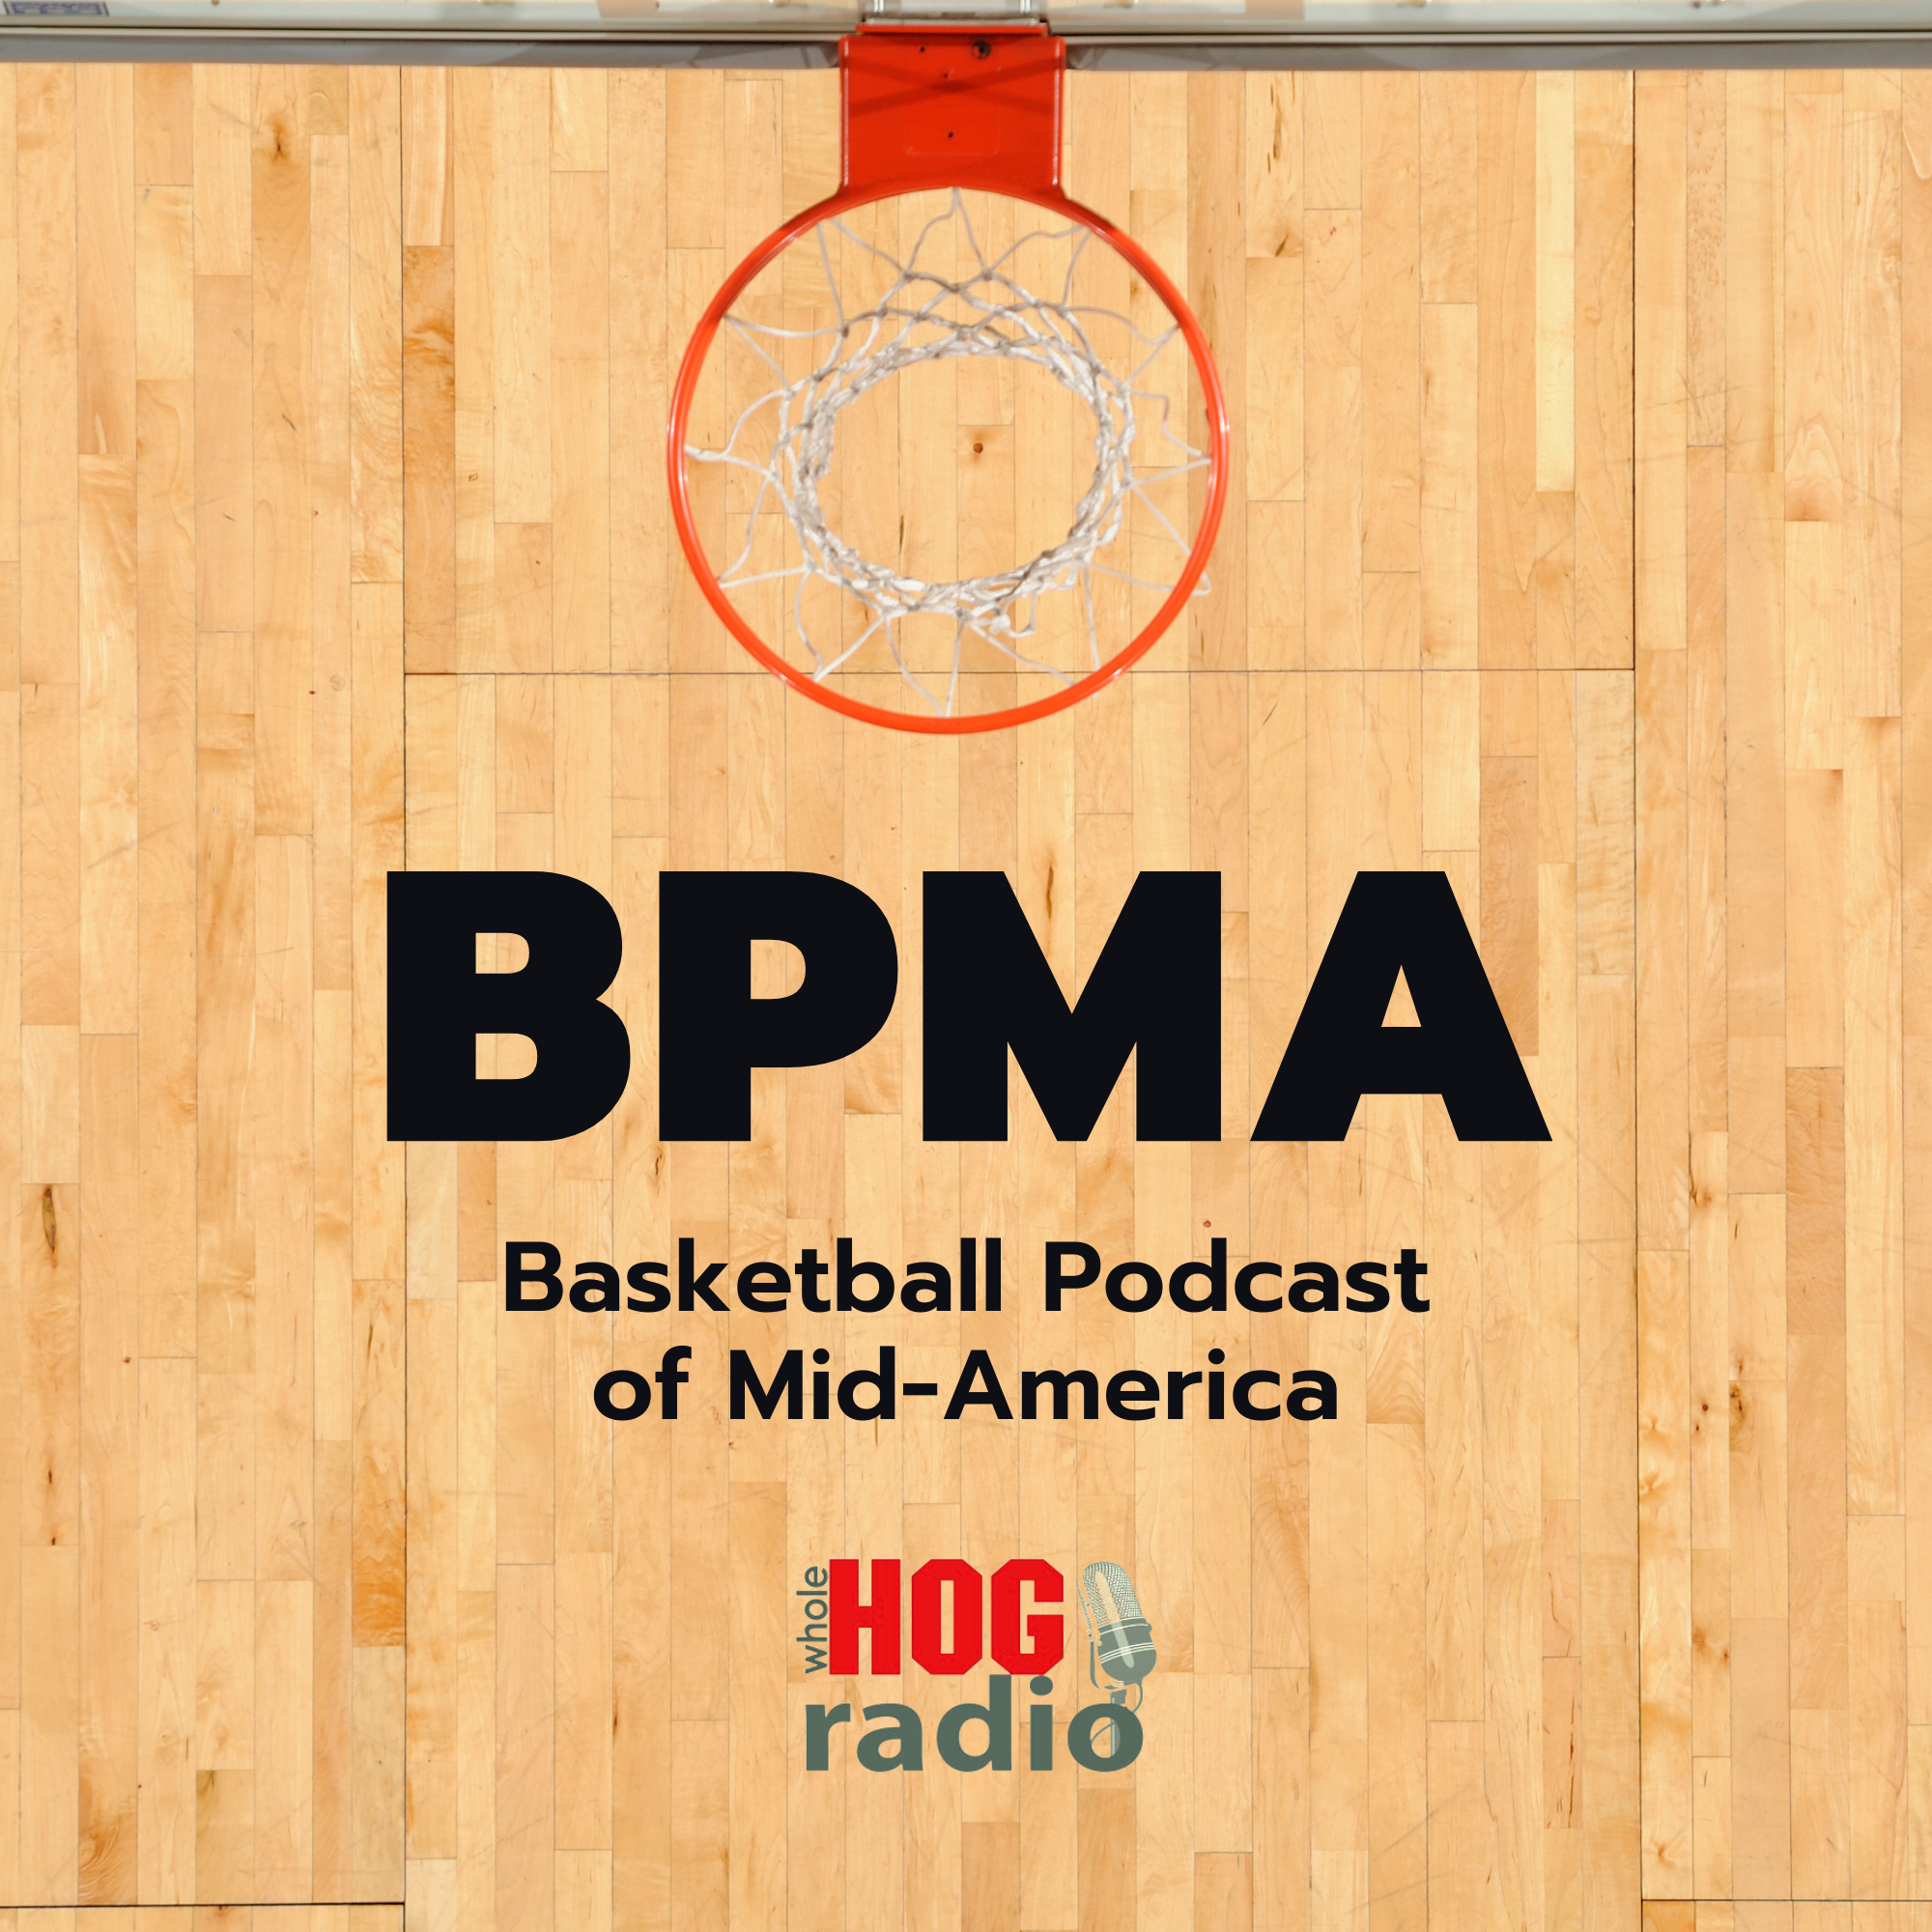 Basketball Podcast of Mid-America: Schedules and Rosters